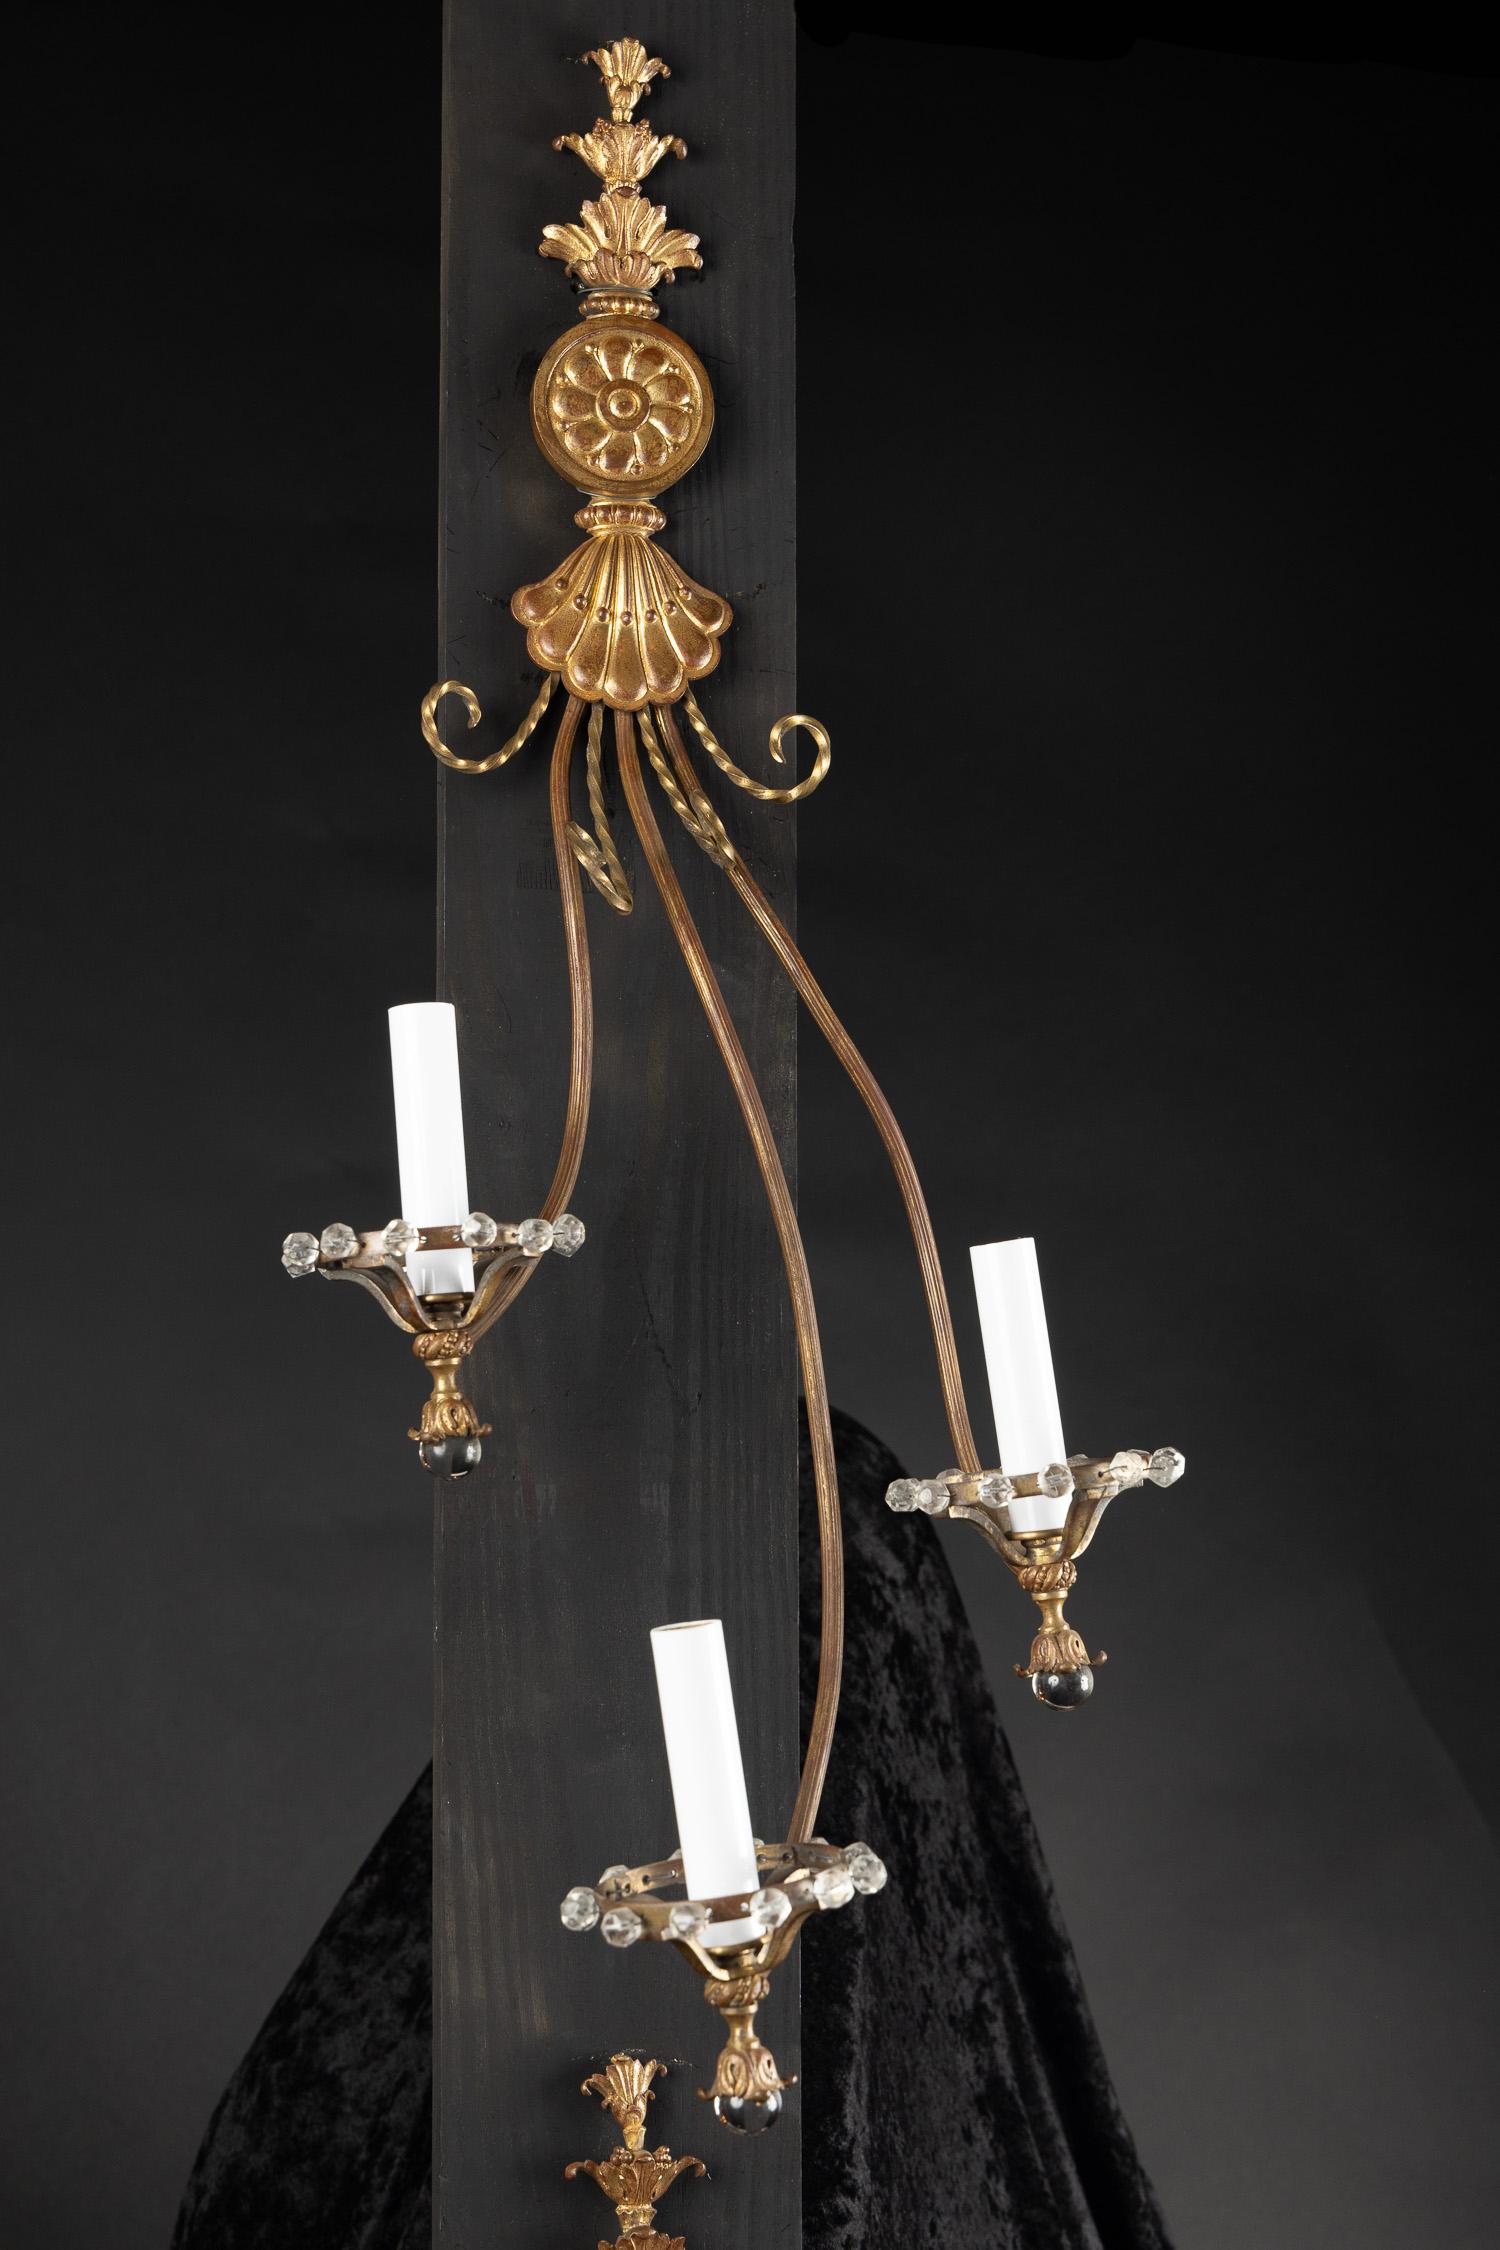 This fantastically unique pair Art Nouveau Sconces are made of bronze and feature detailed crystal elements. The pair dates back to the 20th century and is especially narrow for its length. The bronze glimmers with a patina, spiraling bronze